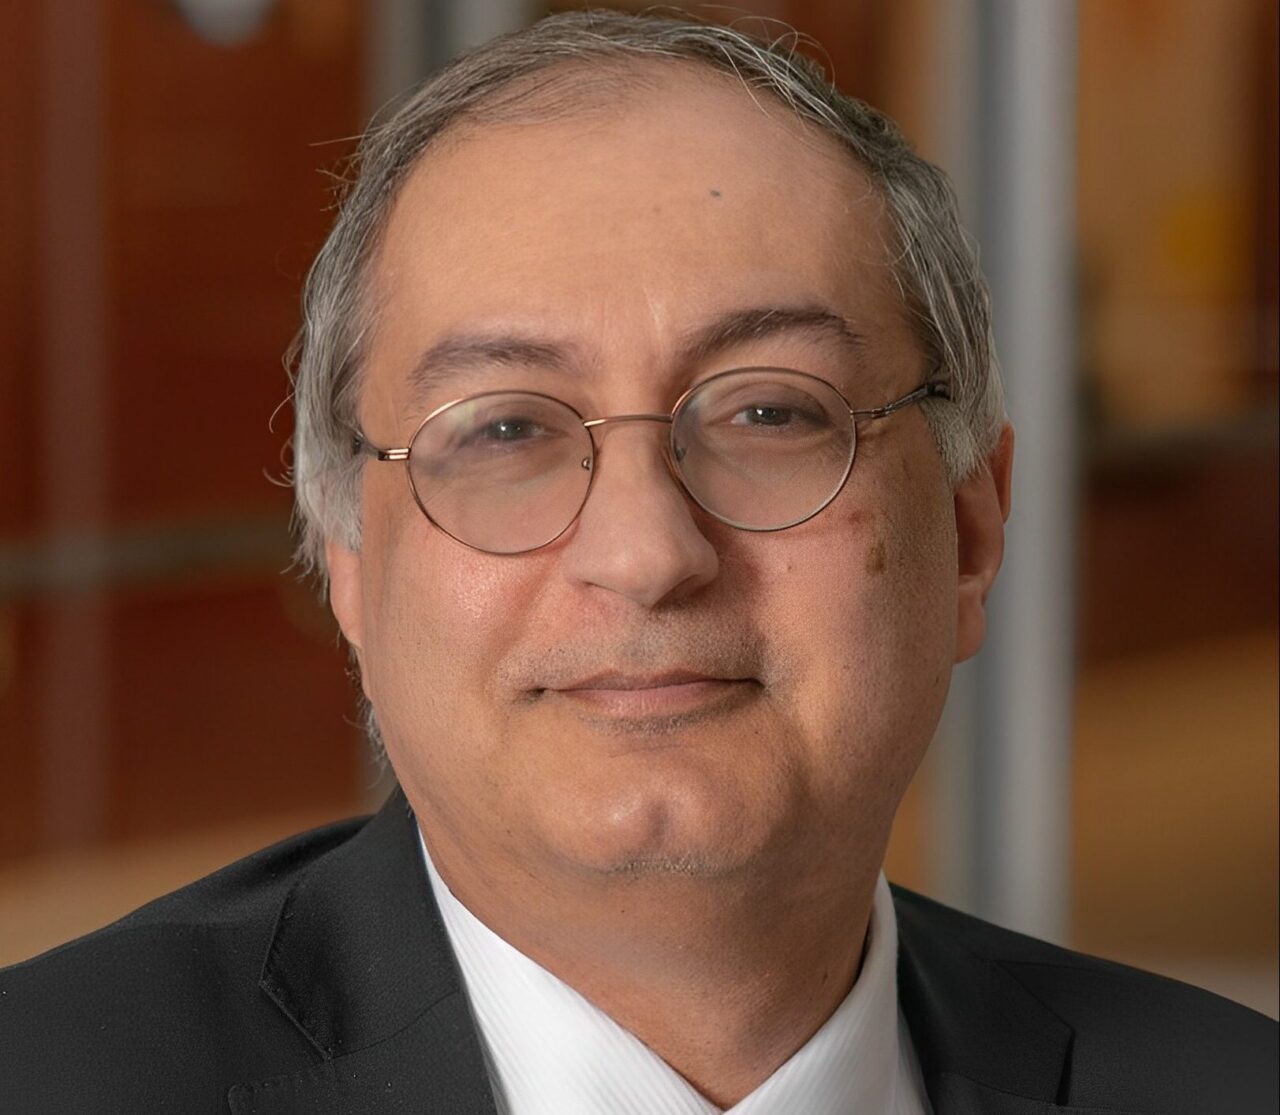 Wafik S. El-Deiry: I am super excited to be able to share guest editorial in The Cancer Letter with the vision for the Worldwide Innovative Network WIN Consortium in cancer personalized medicine